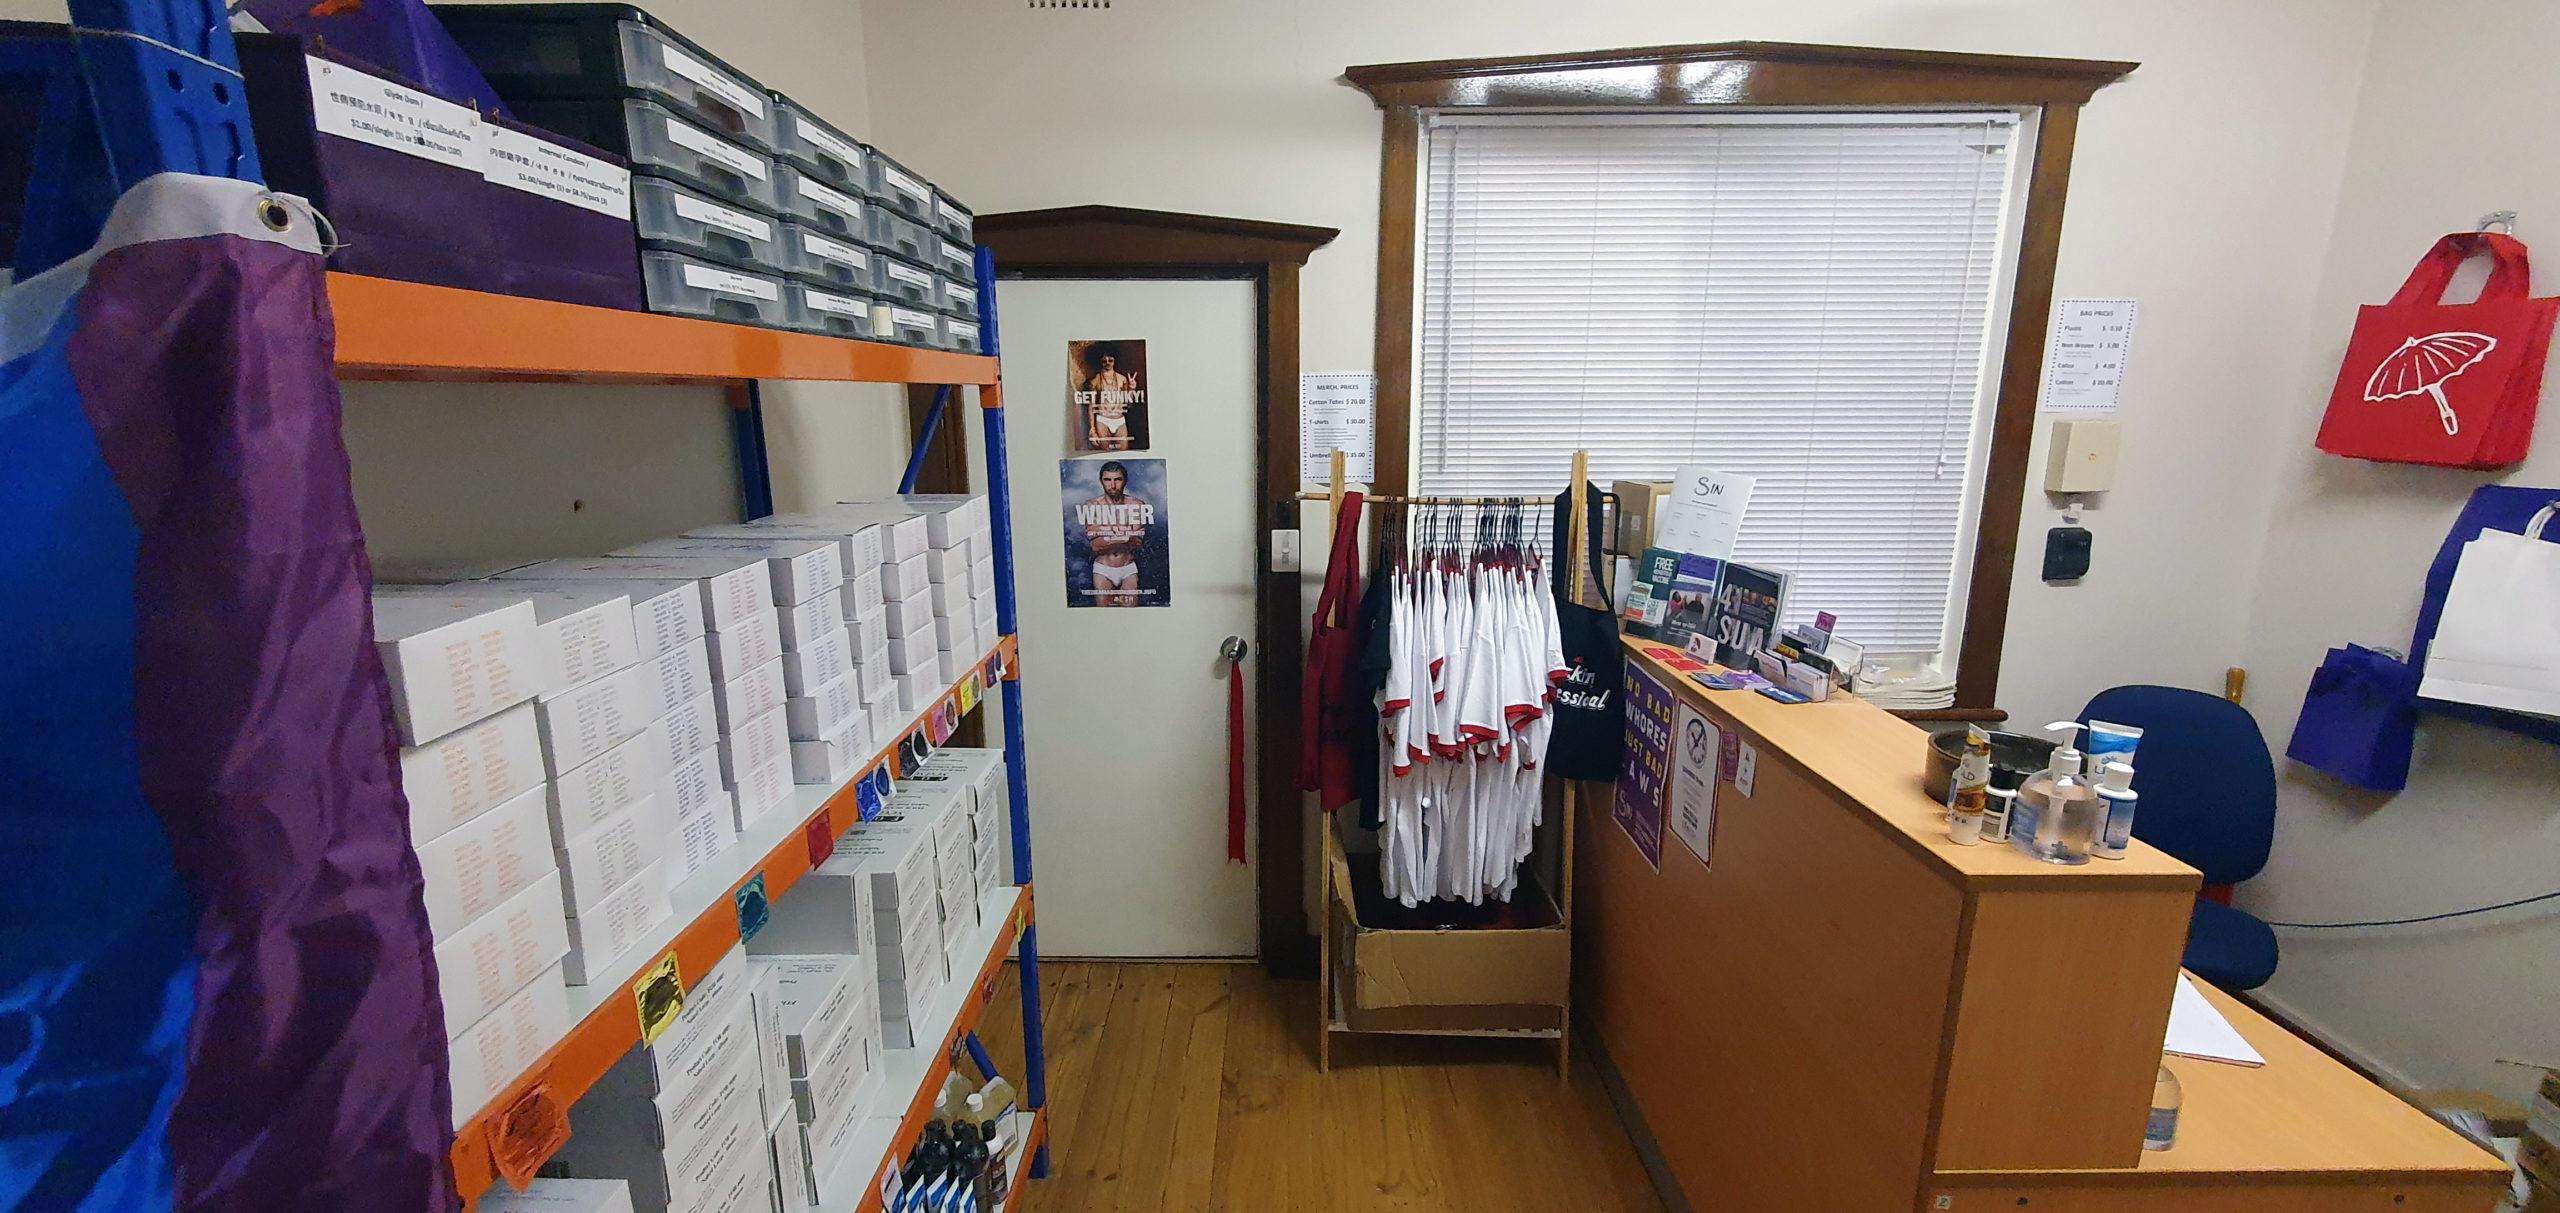 The SIN safer sex shop: a room in the office of the South Australian sex worker peer organisation, stacked with bulk supplies of condoms, lube, and other safer sex supplies.